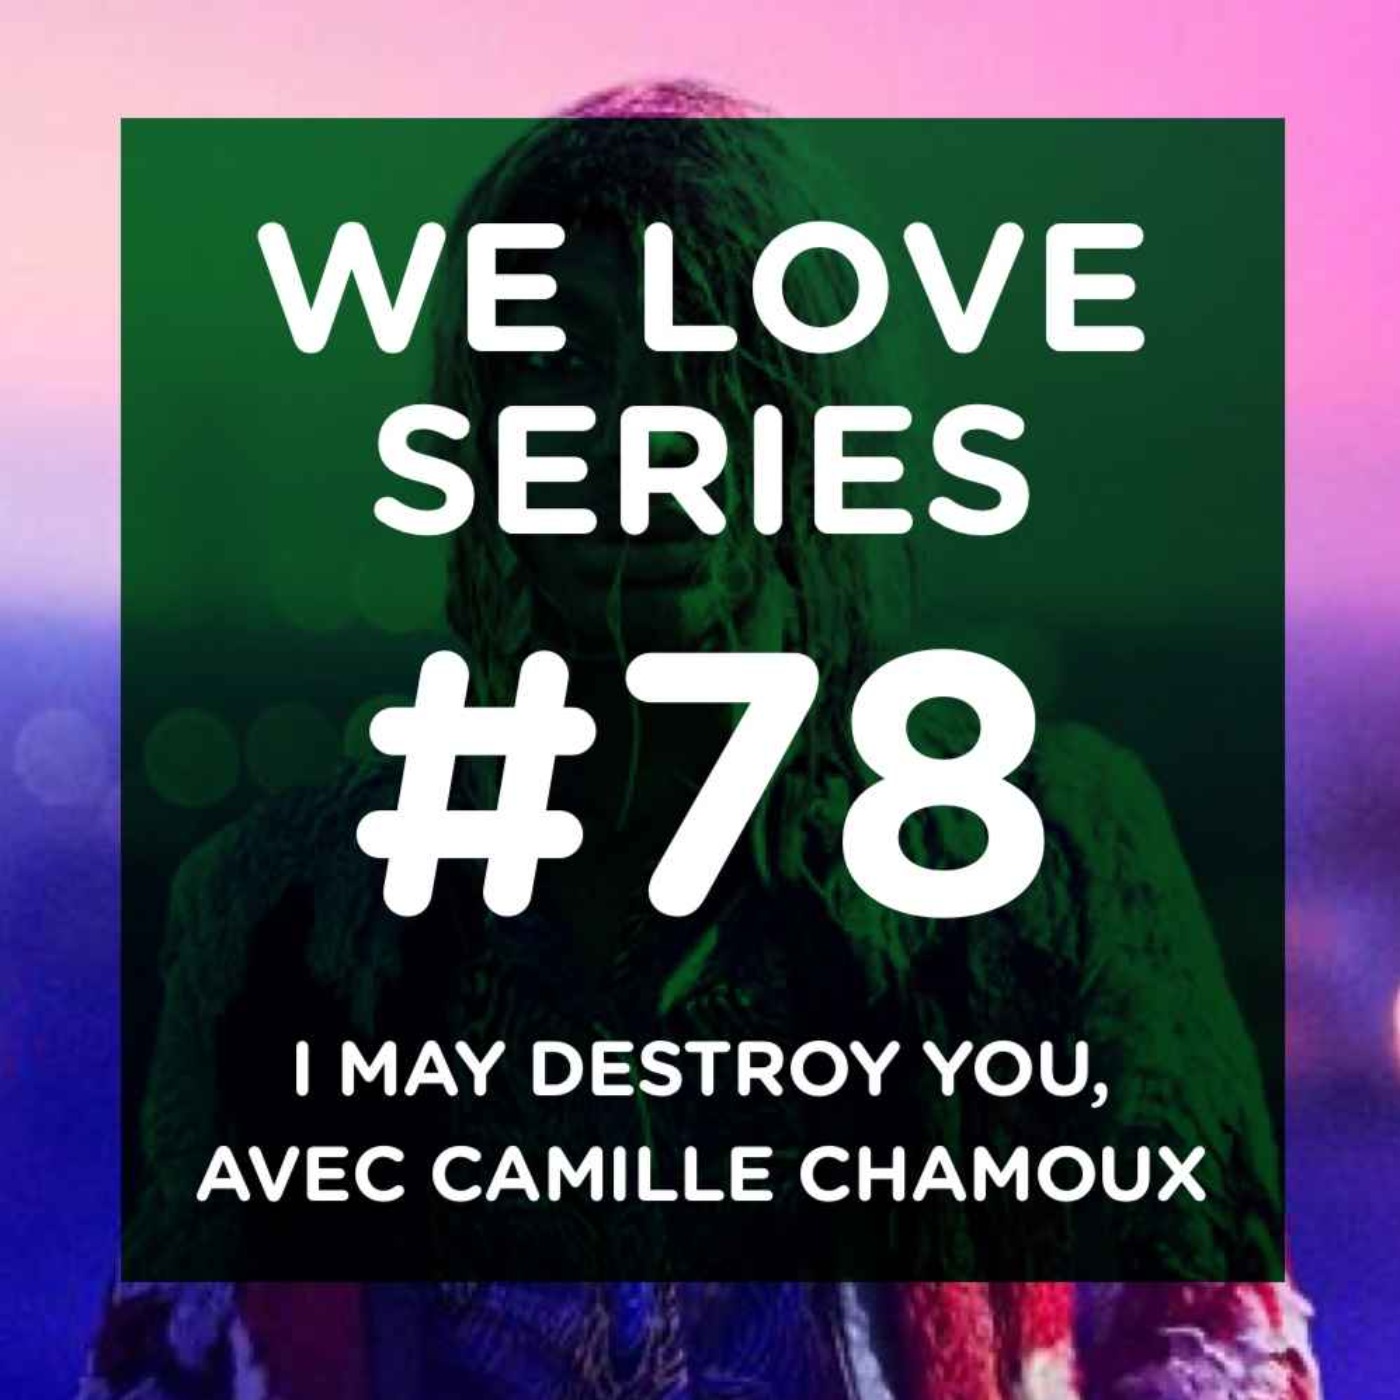 I May Destroy You, avec Camille Chamoux